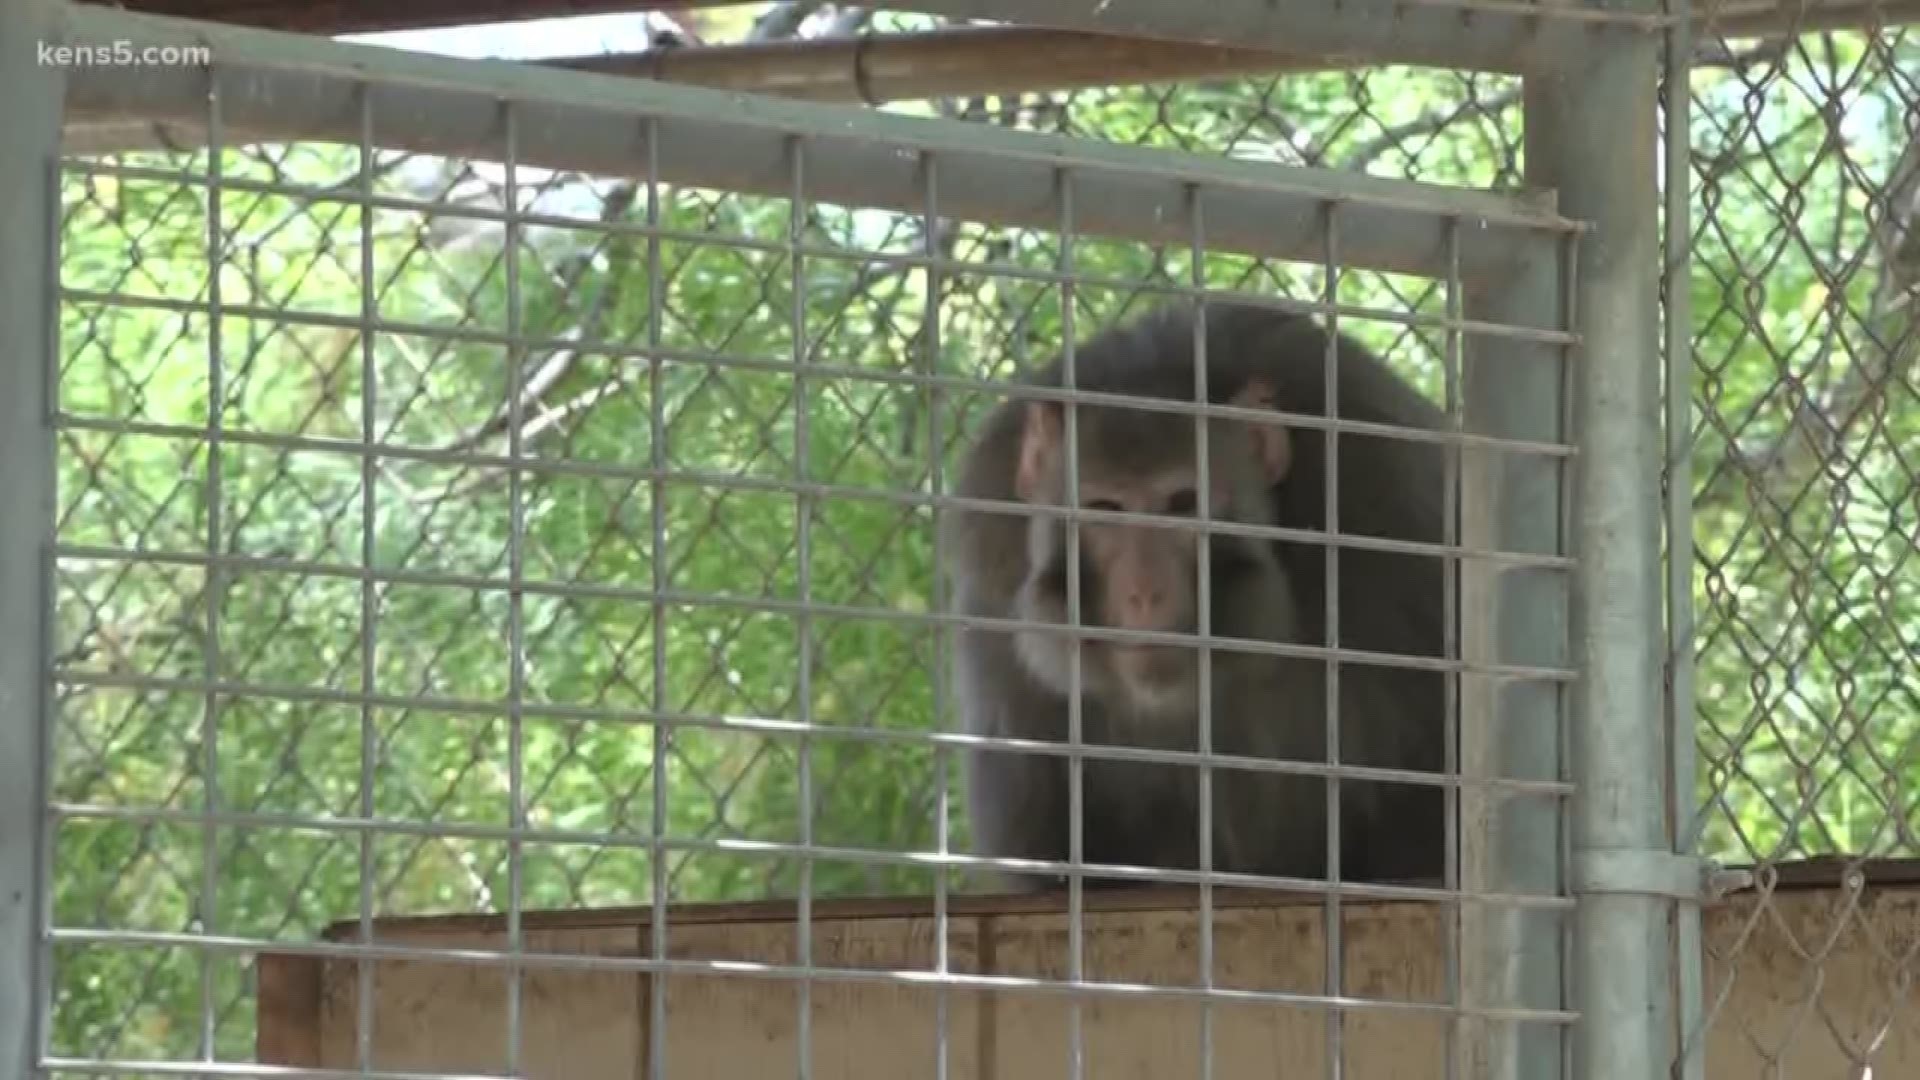 His welcome to South Texas was a bit bumpy, but a week later, the monkey that ran loose at the San Antonio Airport seems to be adjusting just fine at his new home.